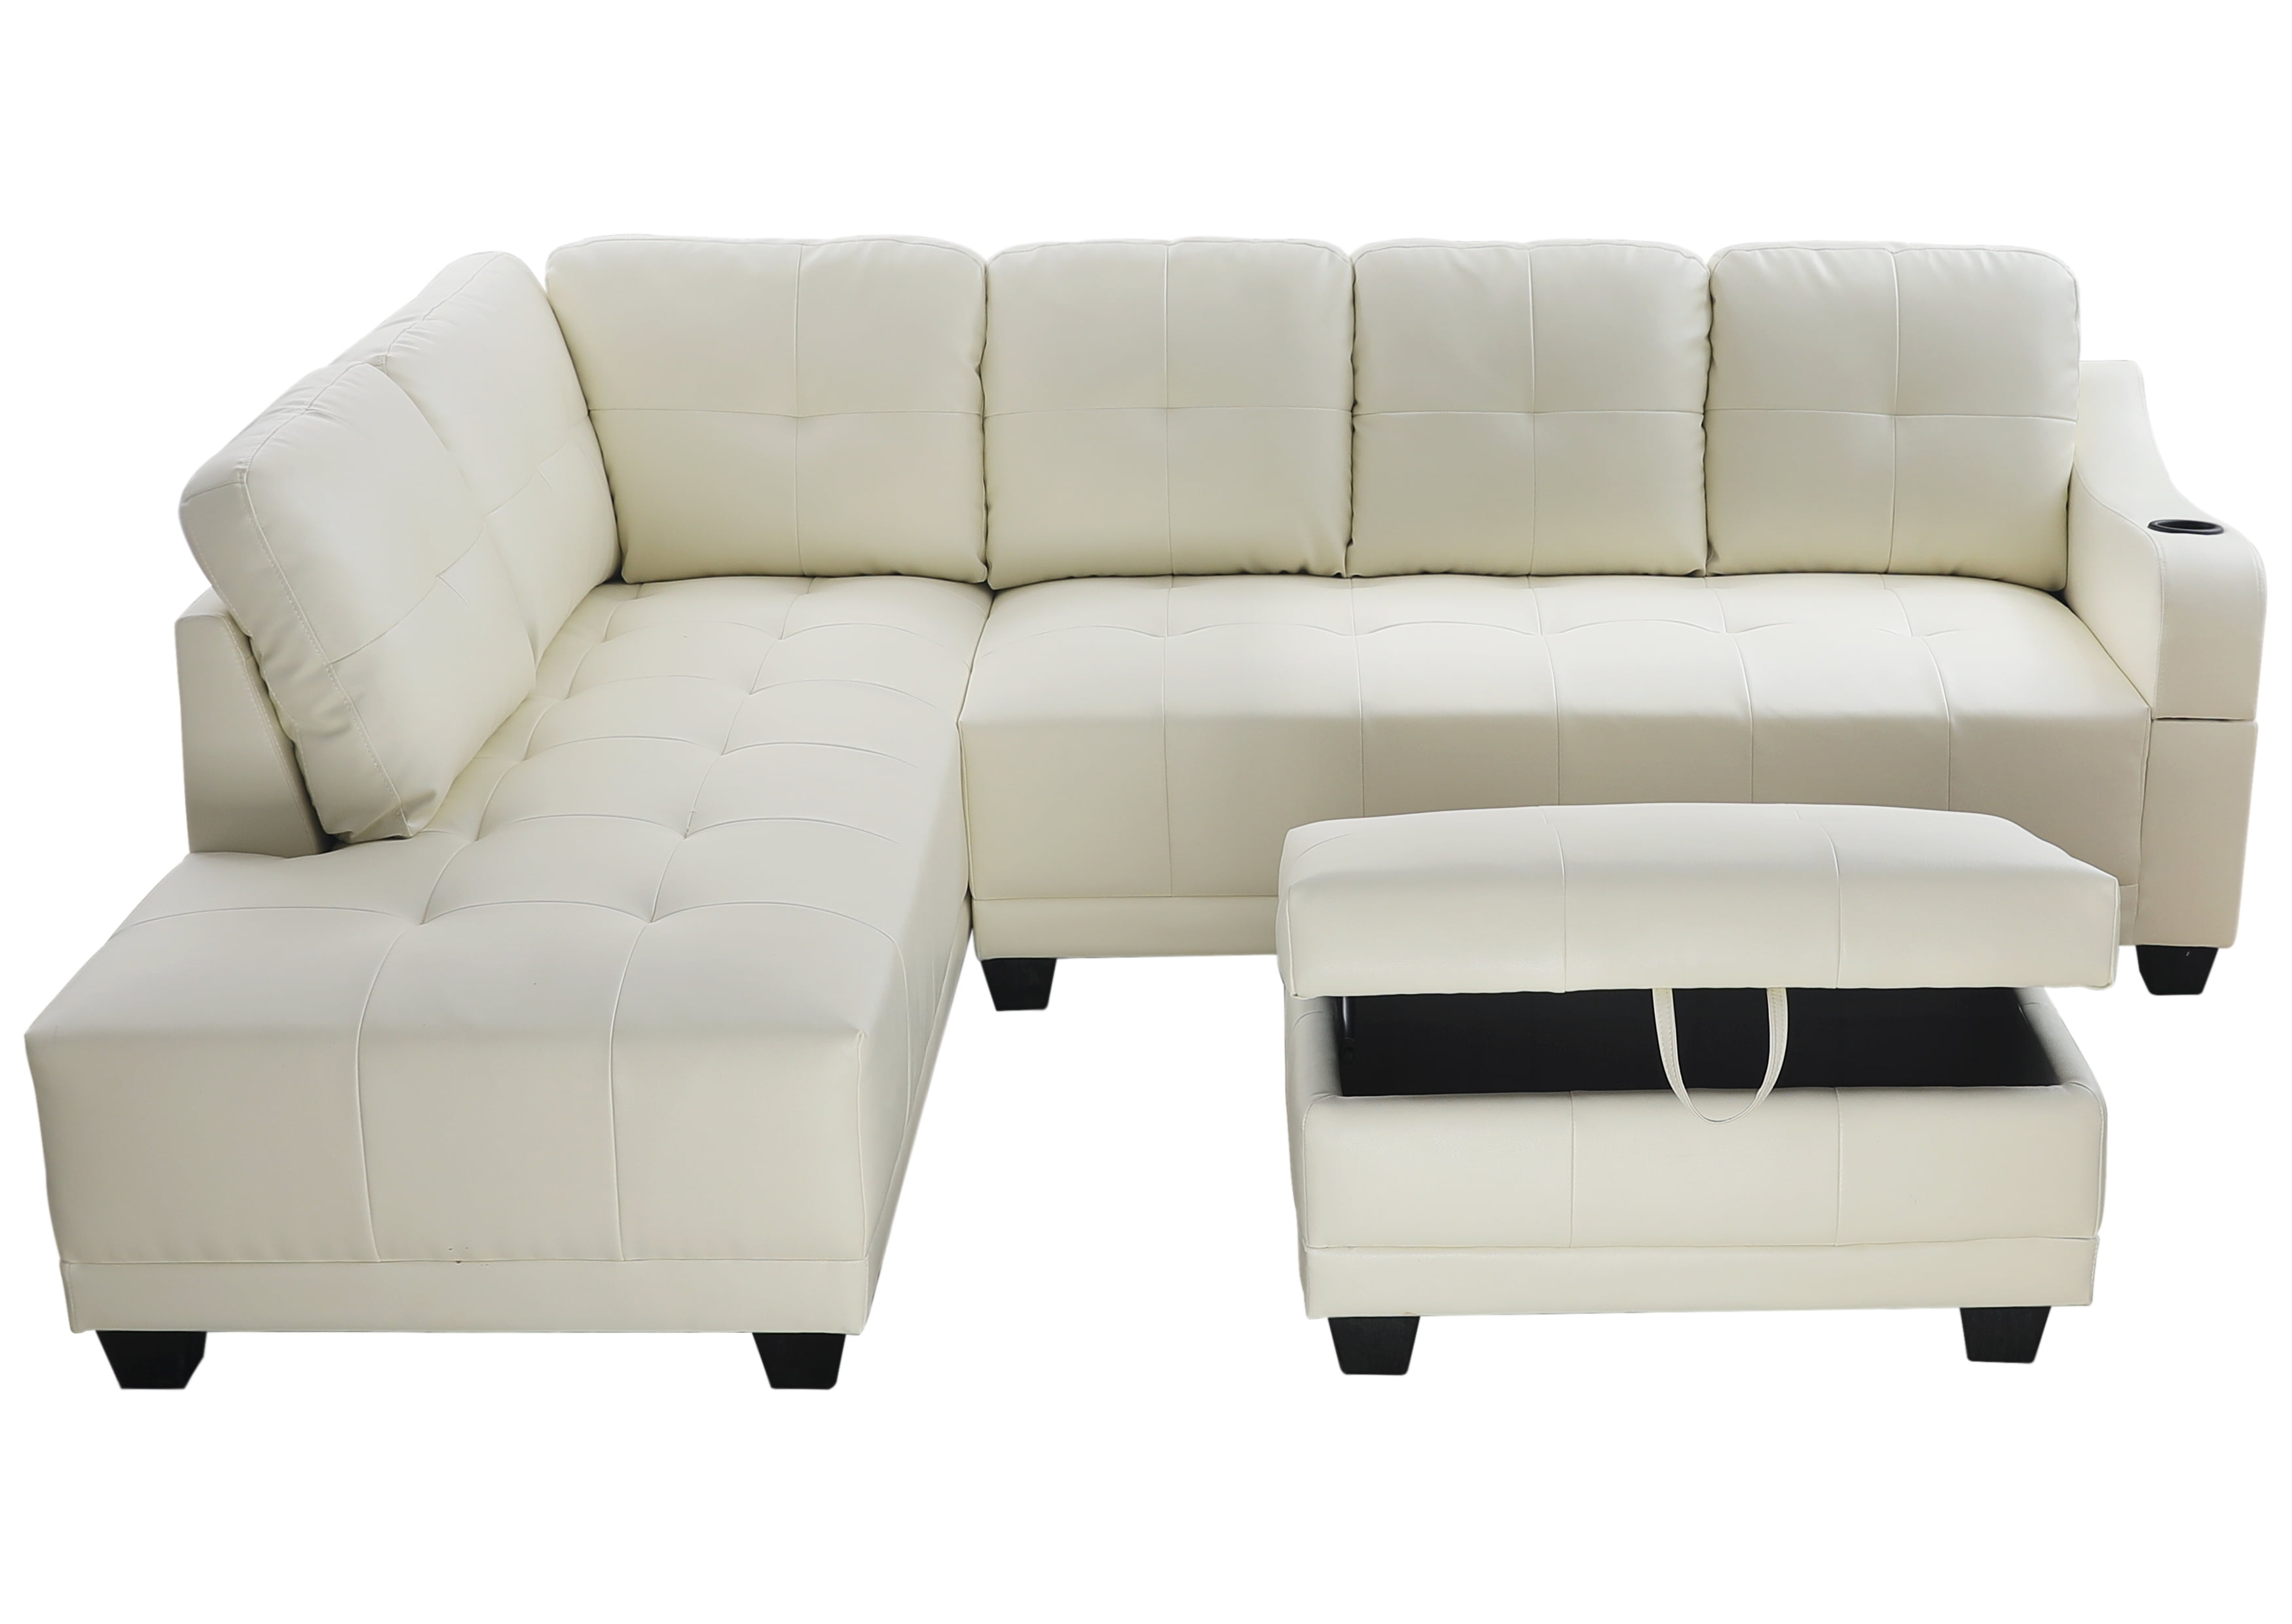 sectional sofa aycp furniture white faux leather sectional sofa with cup holder on the arm and storage ottoman left hand facing chaise more colors